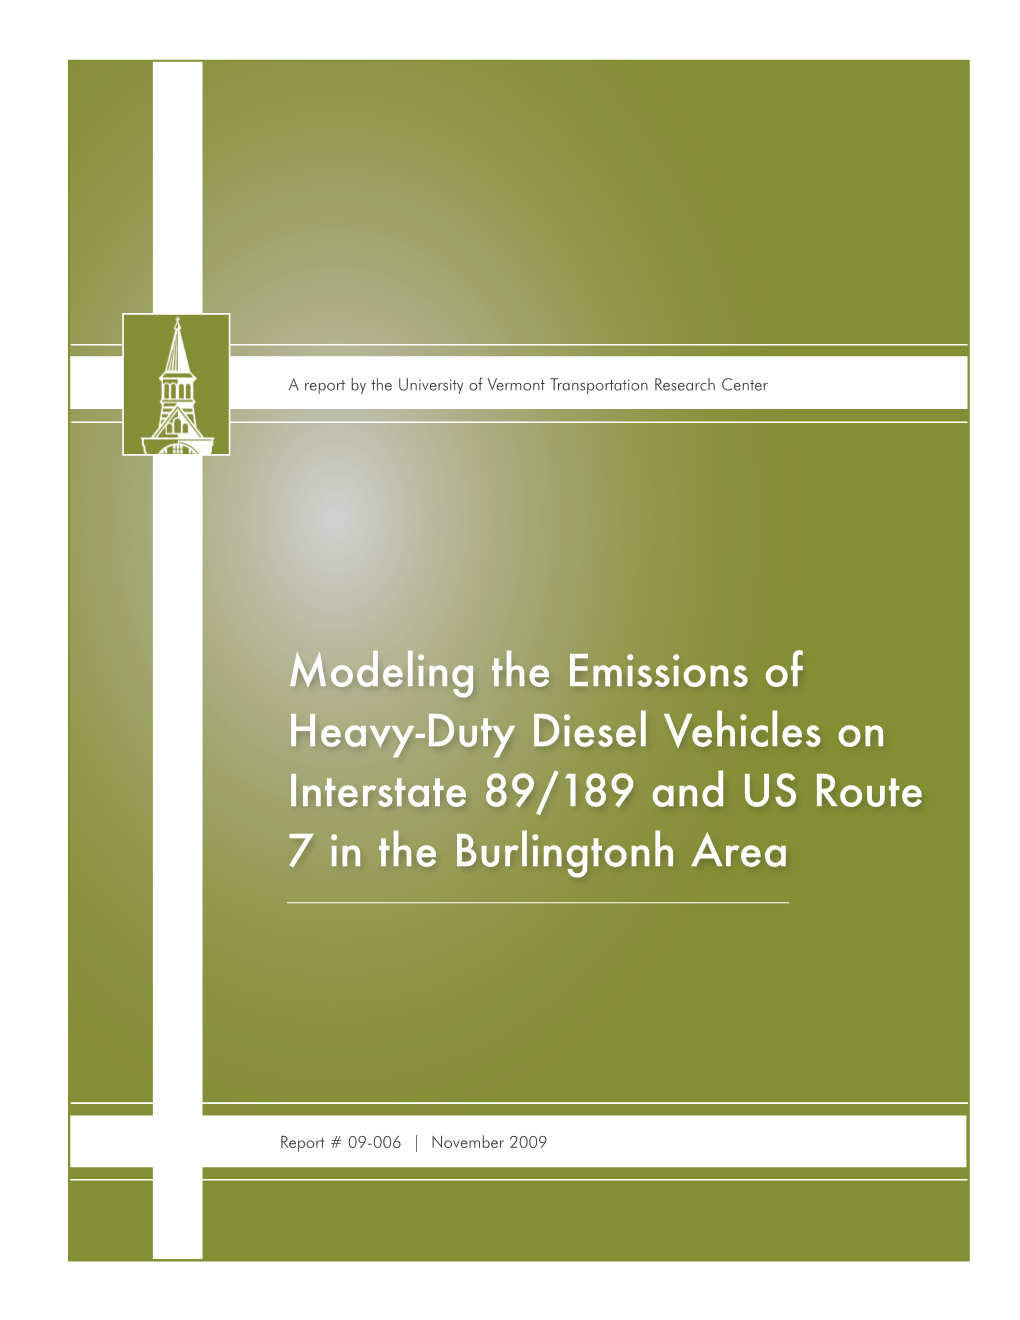 Modeling the Emissions of Heavy-Duty Diesel Vehicles on Interstate 89/189 and US Route 7 in the Burlingtonh Area